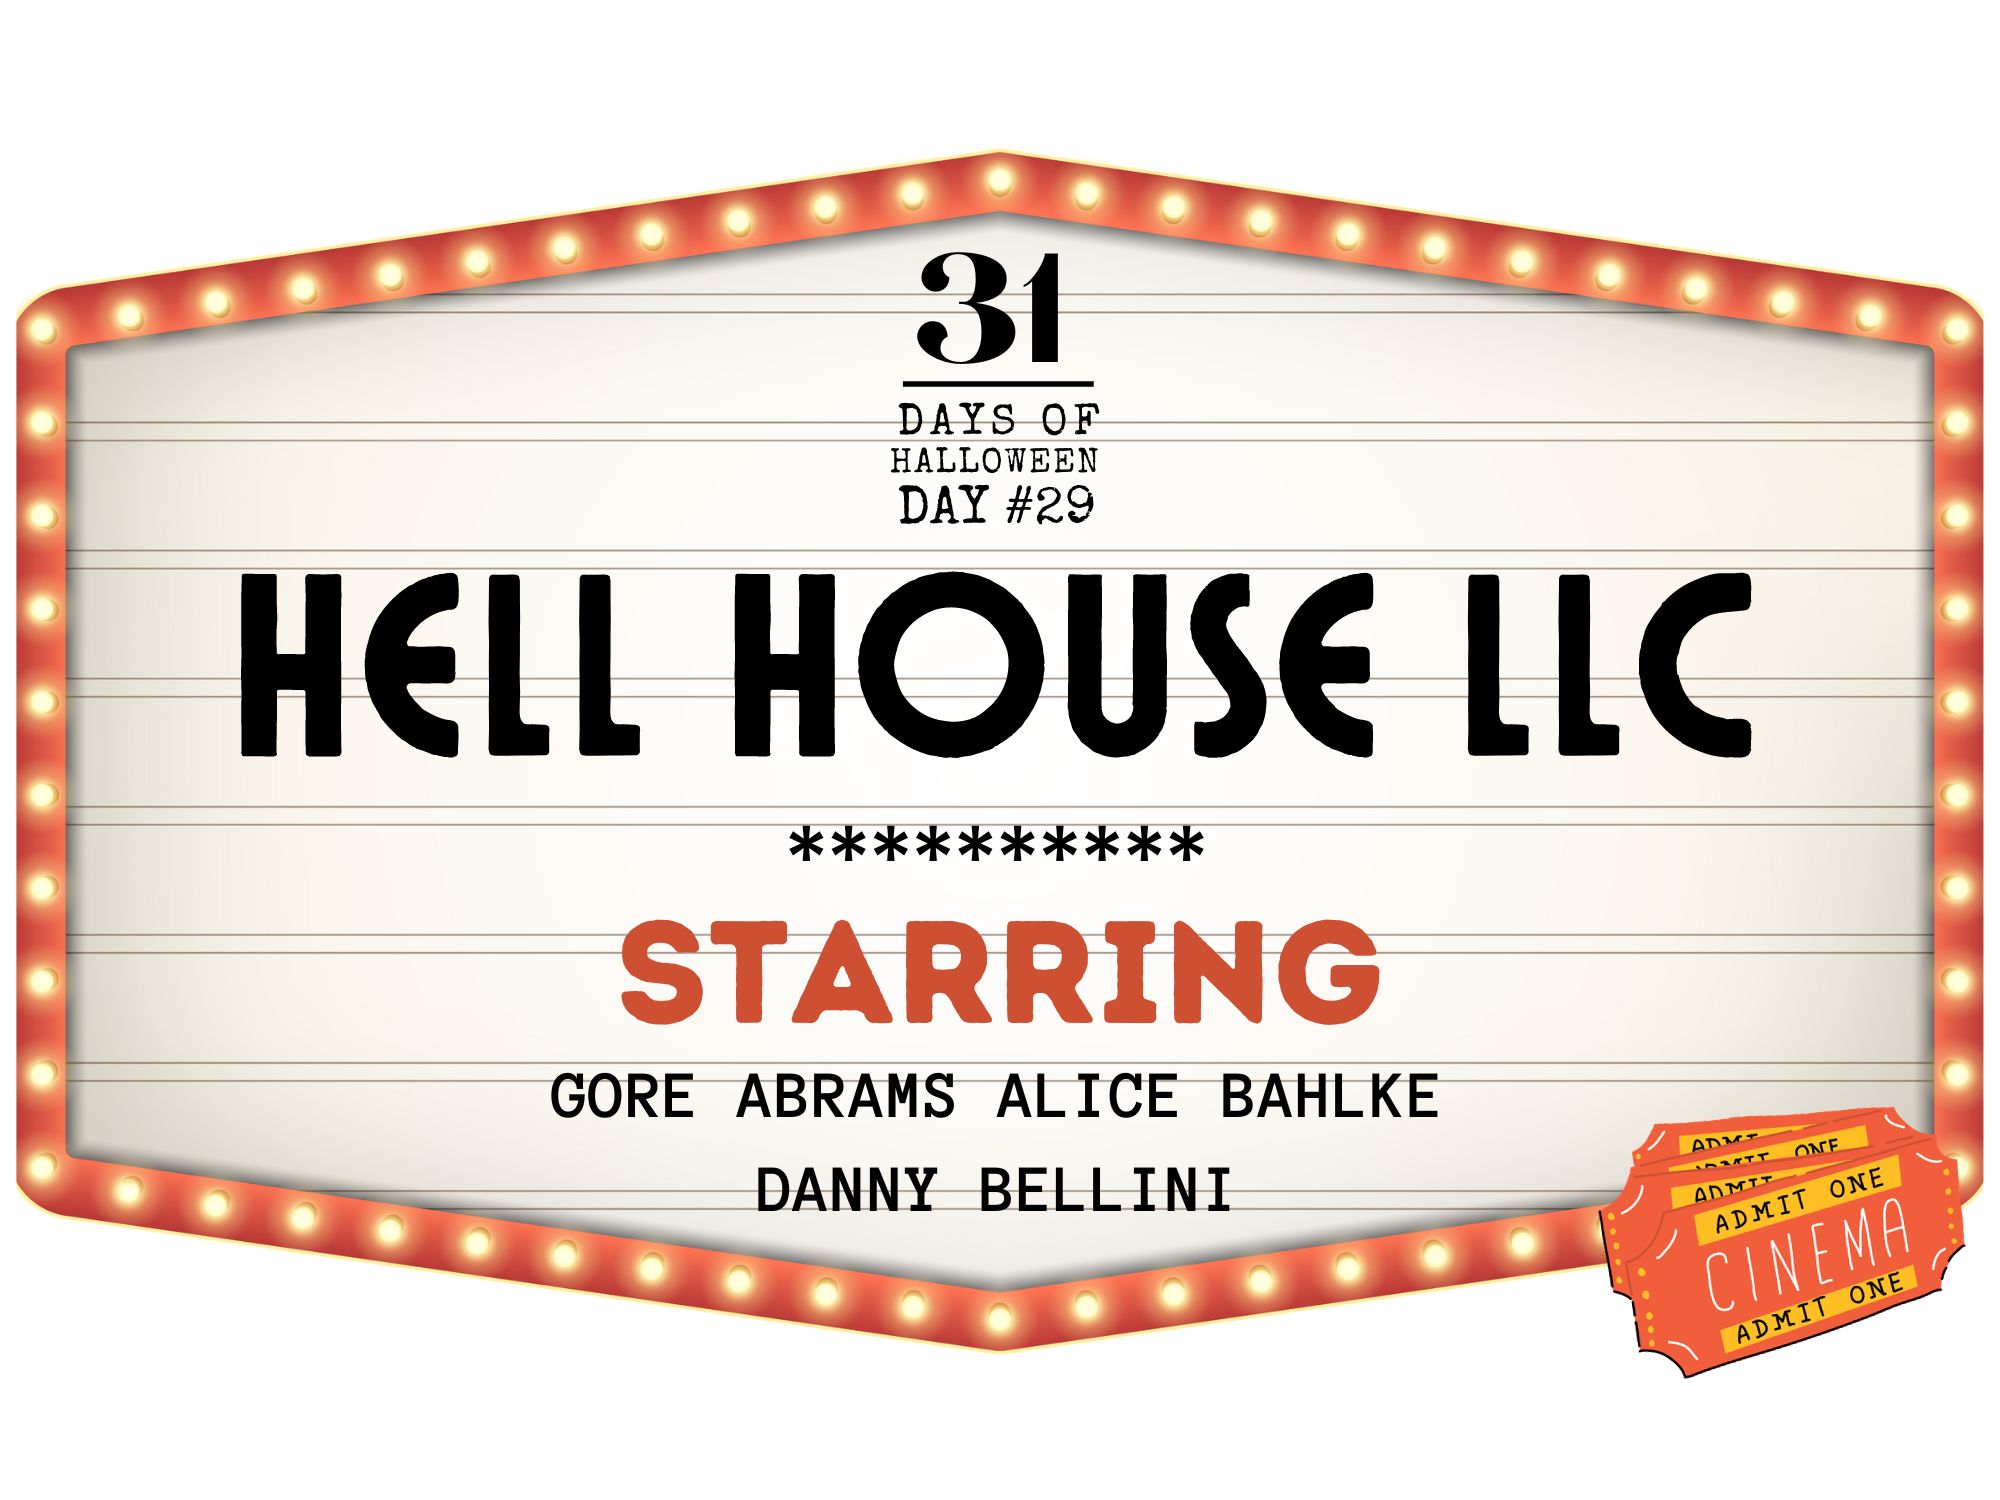 31 Days of Halloween: Day #29, Hell House LLC